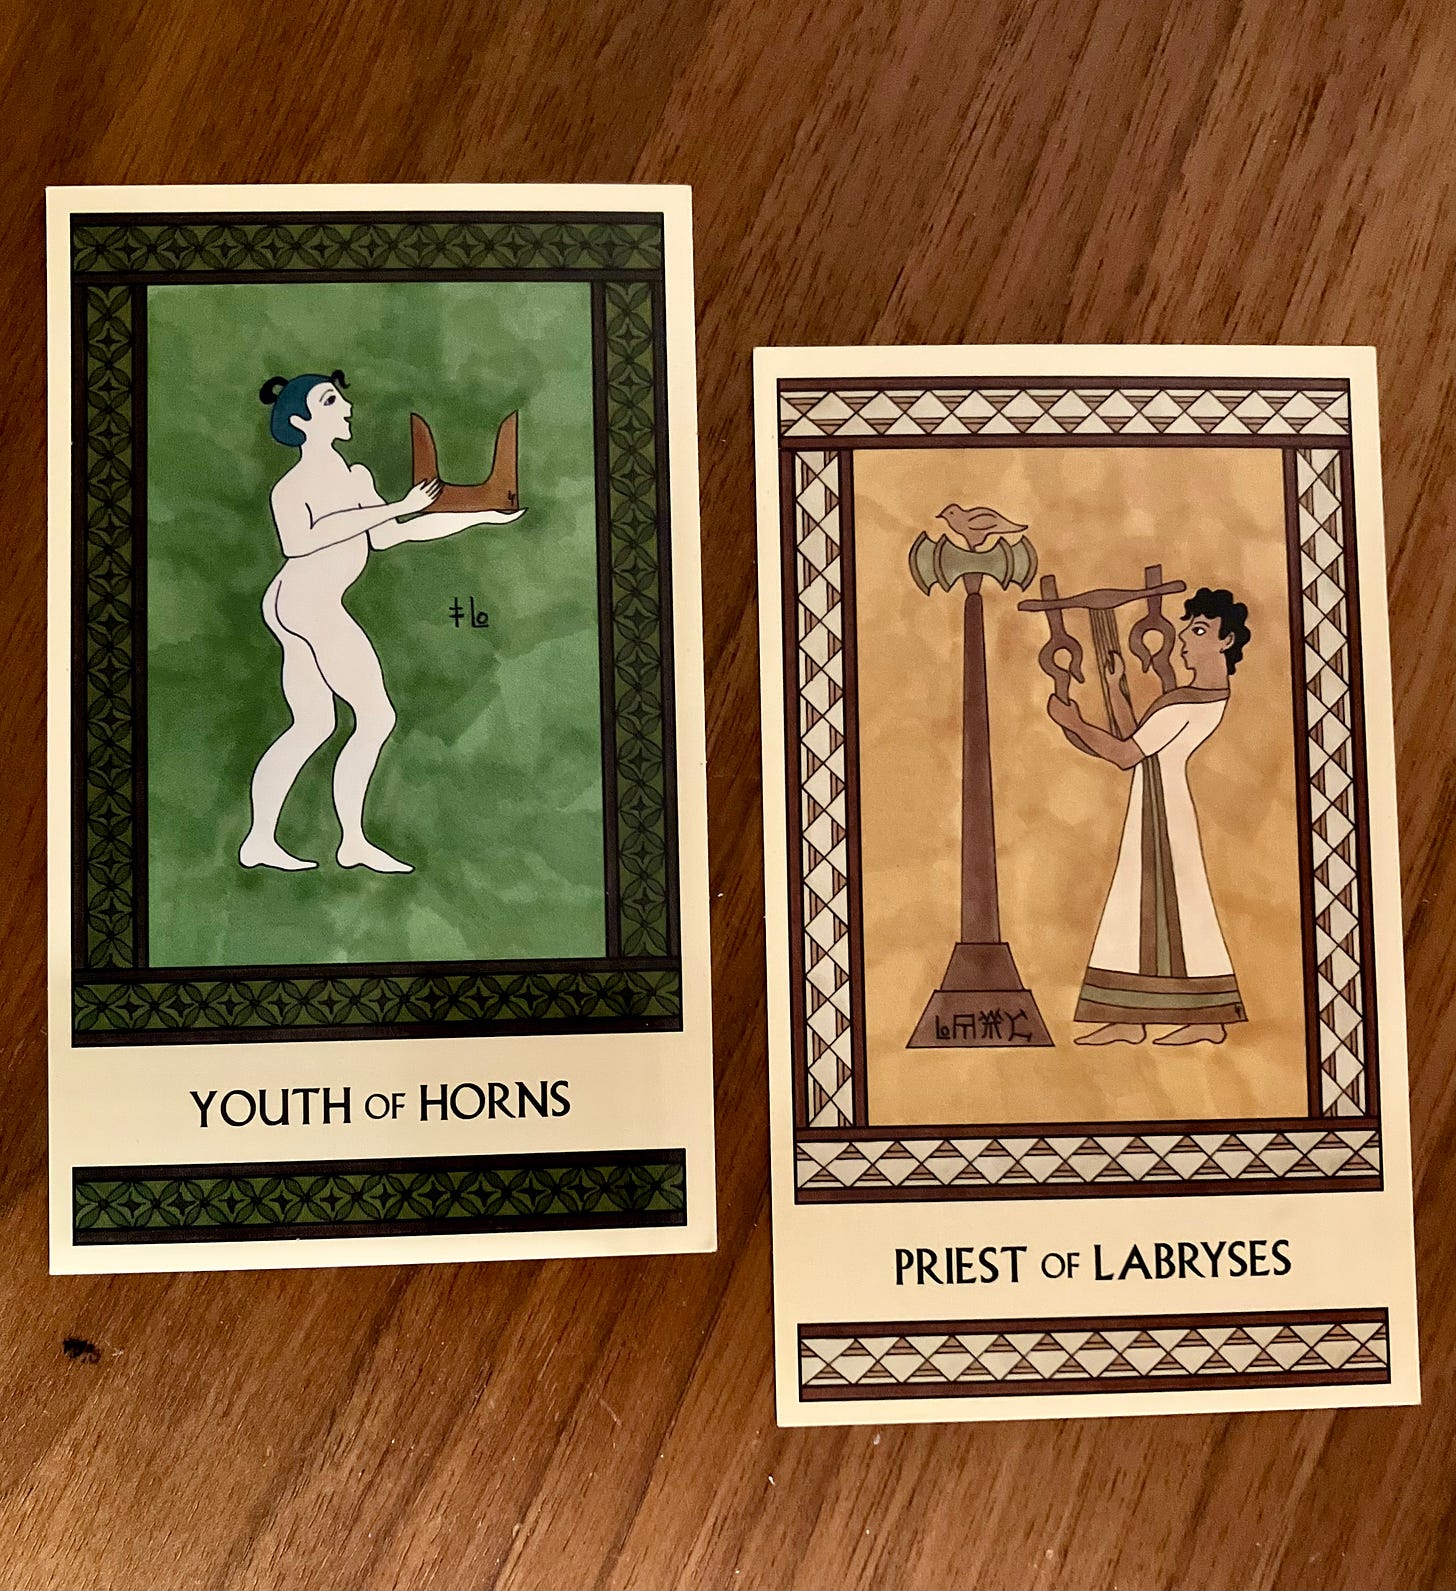 Two Minoan Tarot cards side by side on a wood surface. The Youth of Horns is in shades of green. It shows a young Minoan boy facing right, holding a pair of sacred horns. The Priest of Labryses is in shades of yellow and gold. It shows a Minoan man in priestly robes facing left, playing a lyre, with a tall labrys in front of him. 